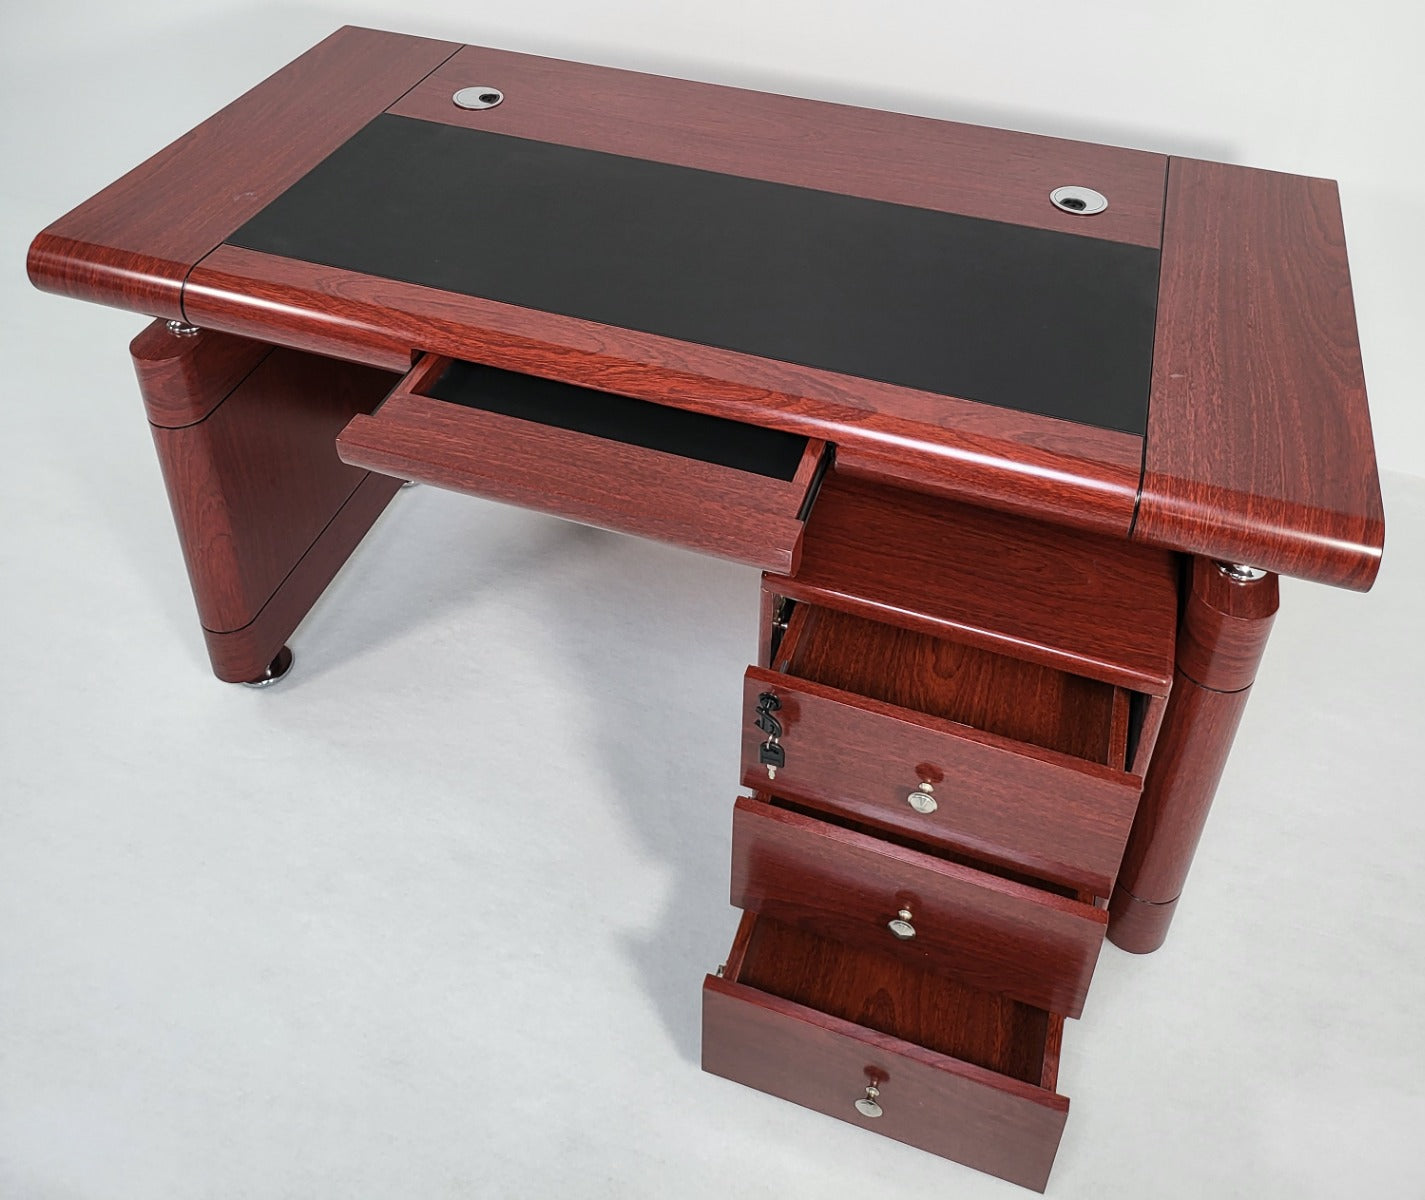 Mahogany Executive Office Desk with Pedestal - KW12B - 1200mm or 1400mm Option